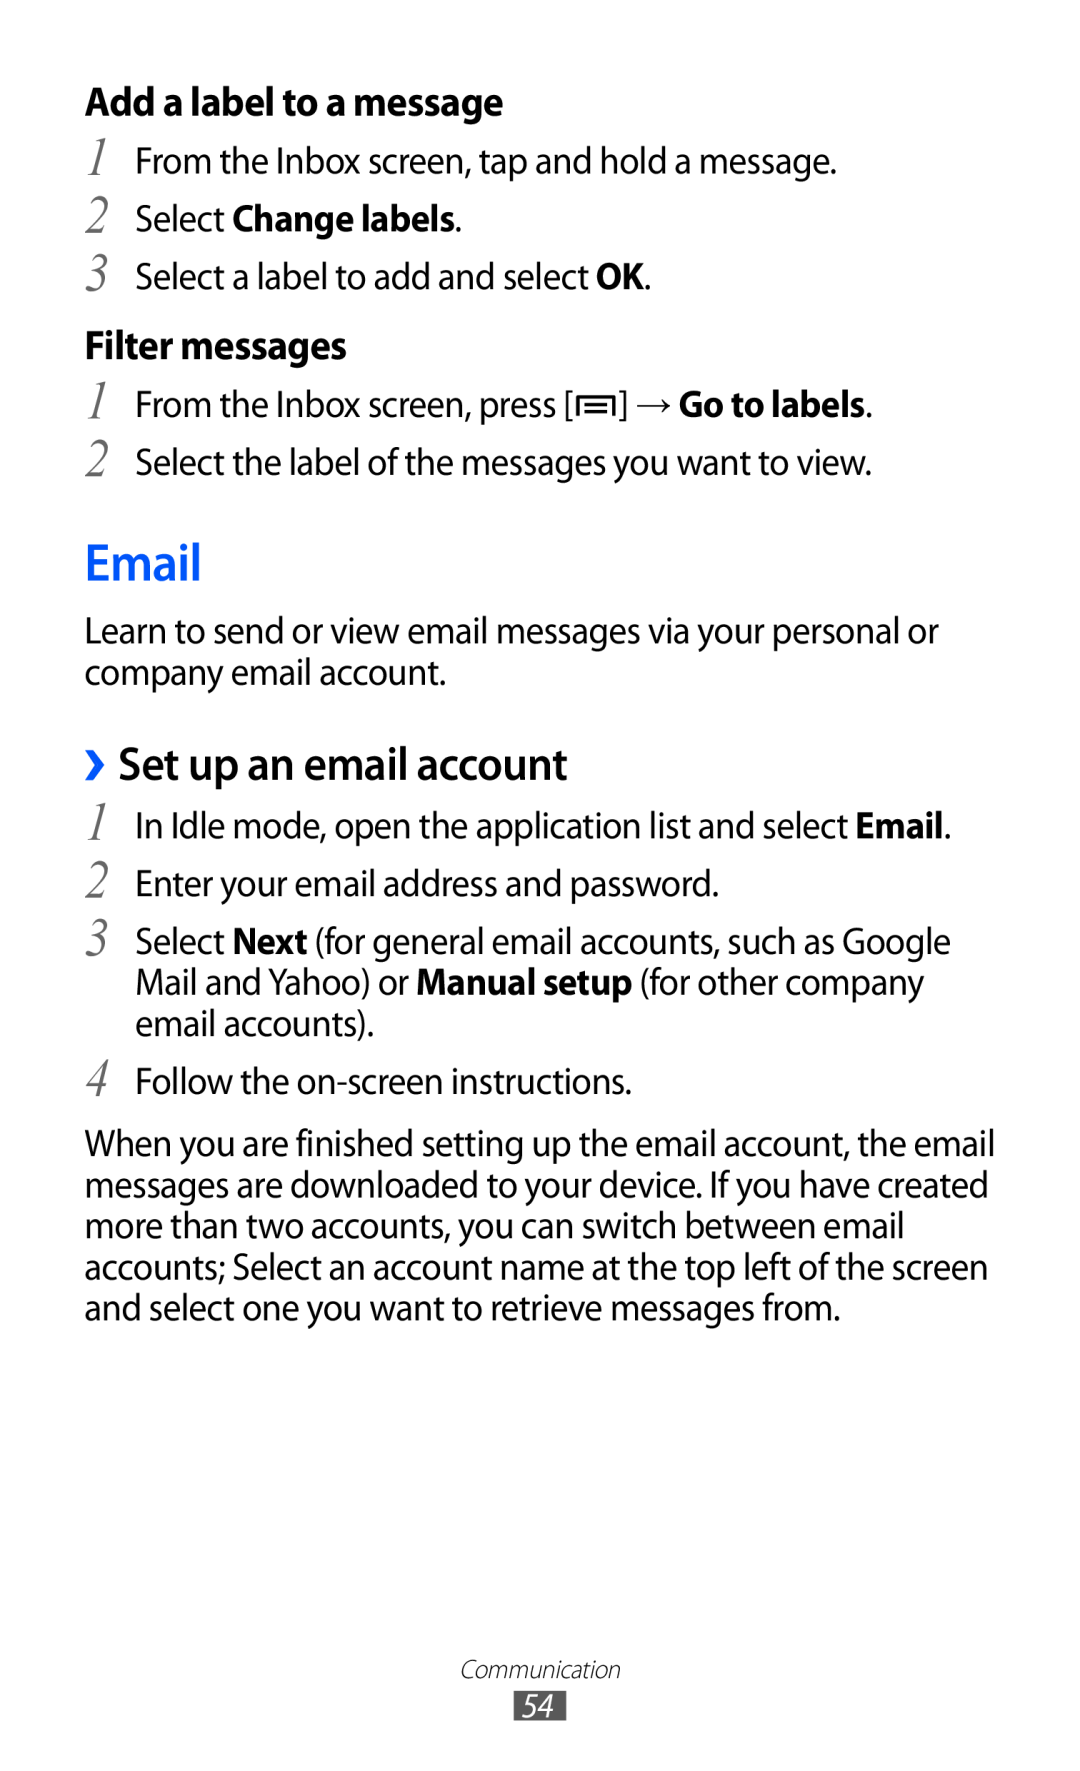 Samsung GT-I9070 Email, ››Set up an email account, Add a label to a message, Filter messages, Select Change labels 